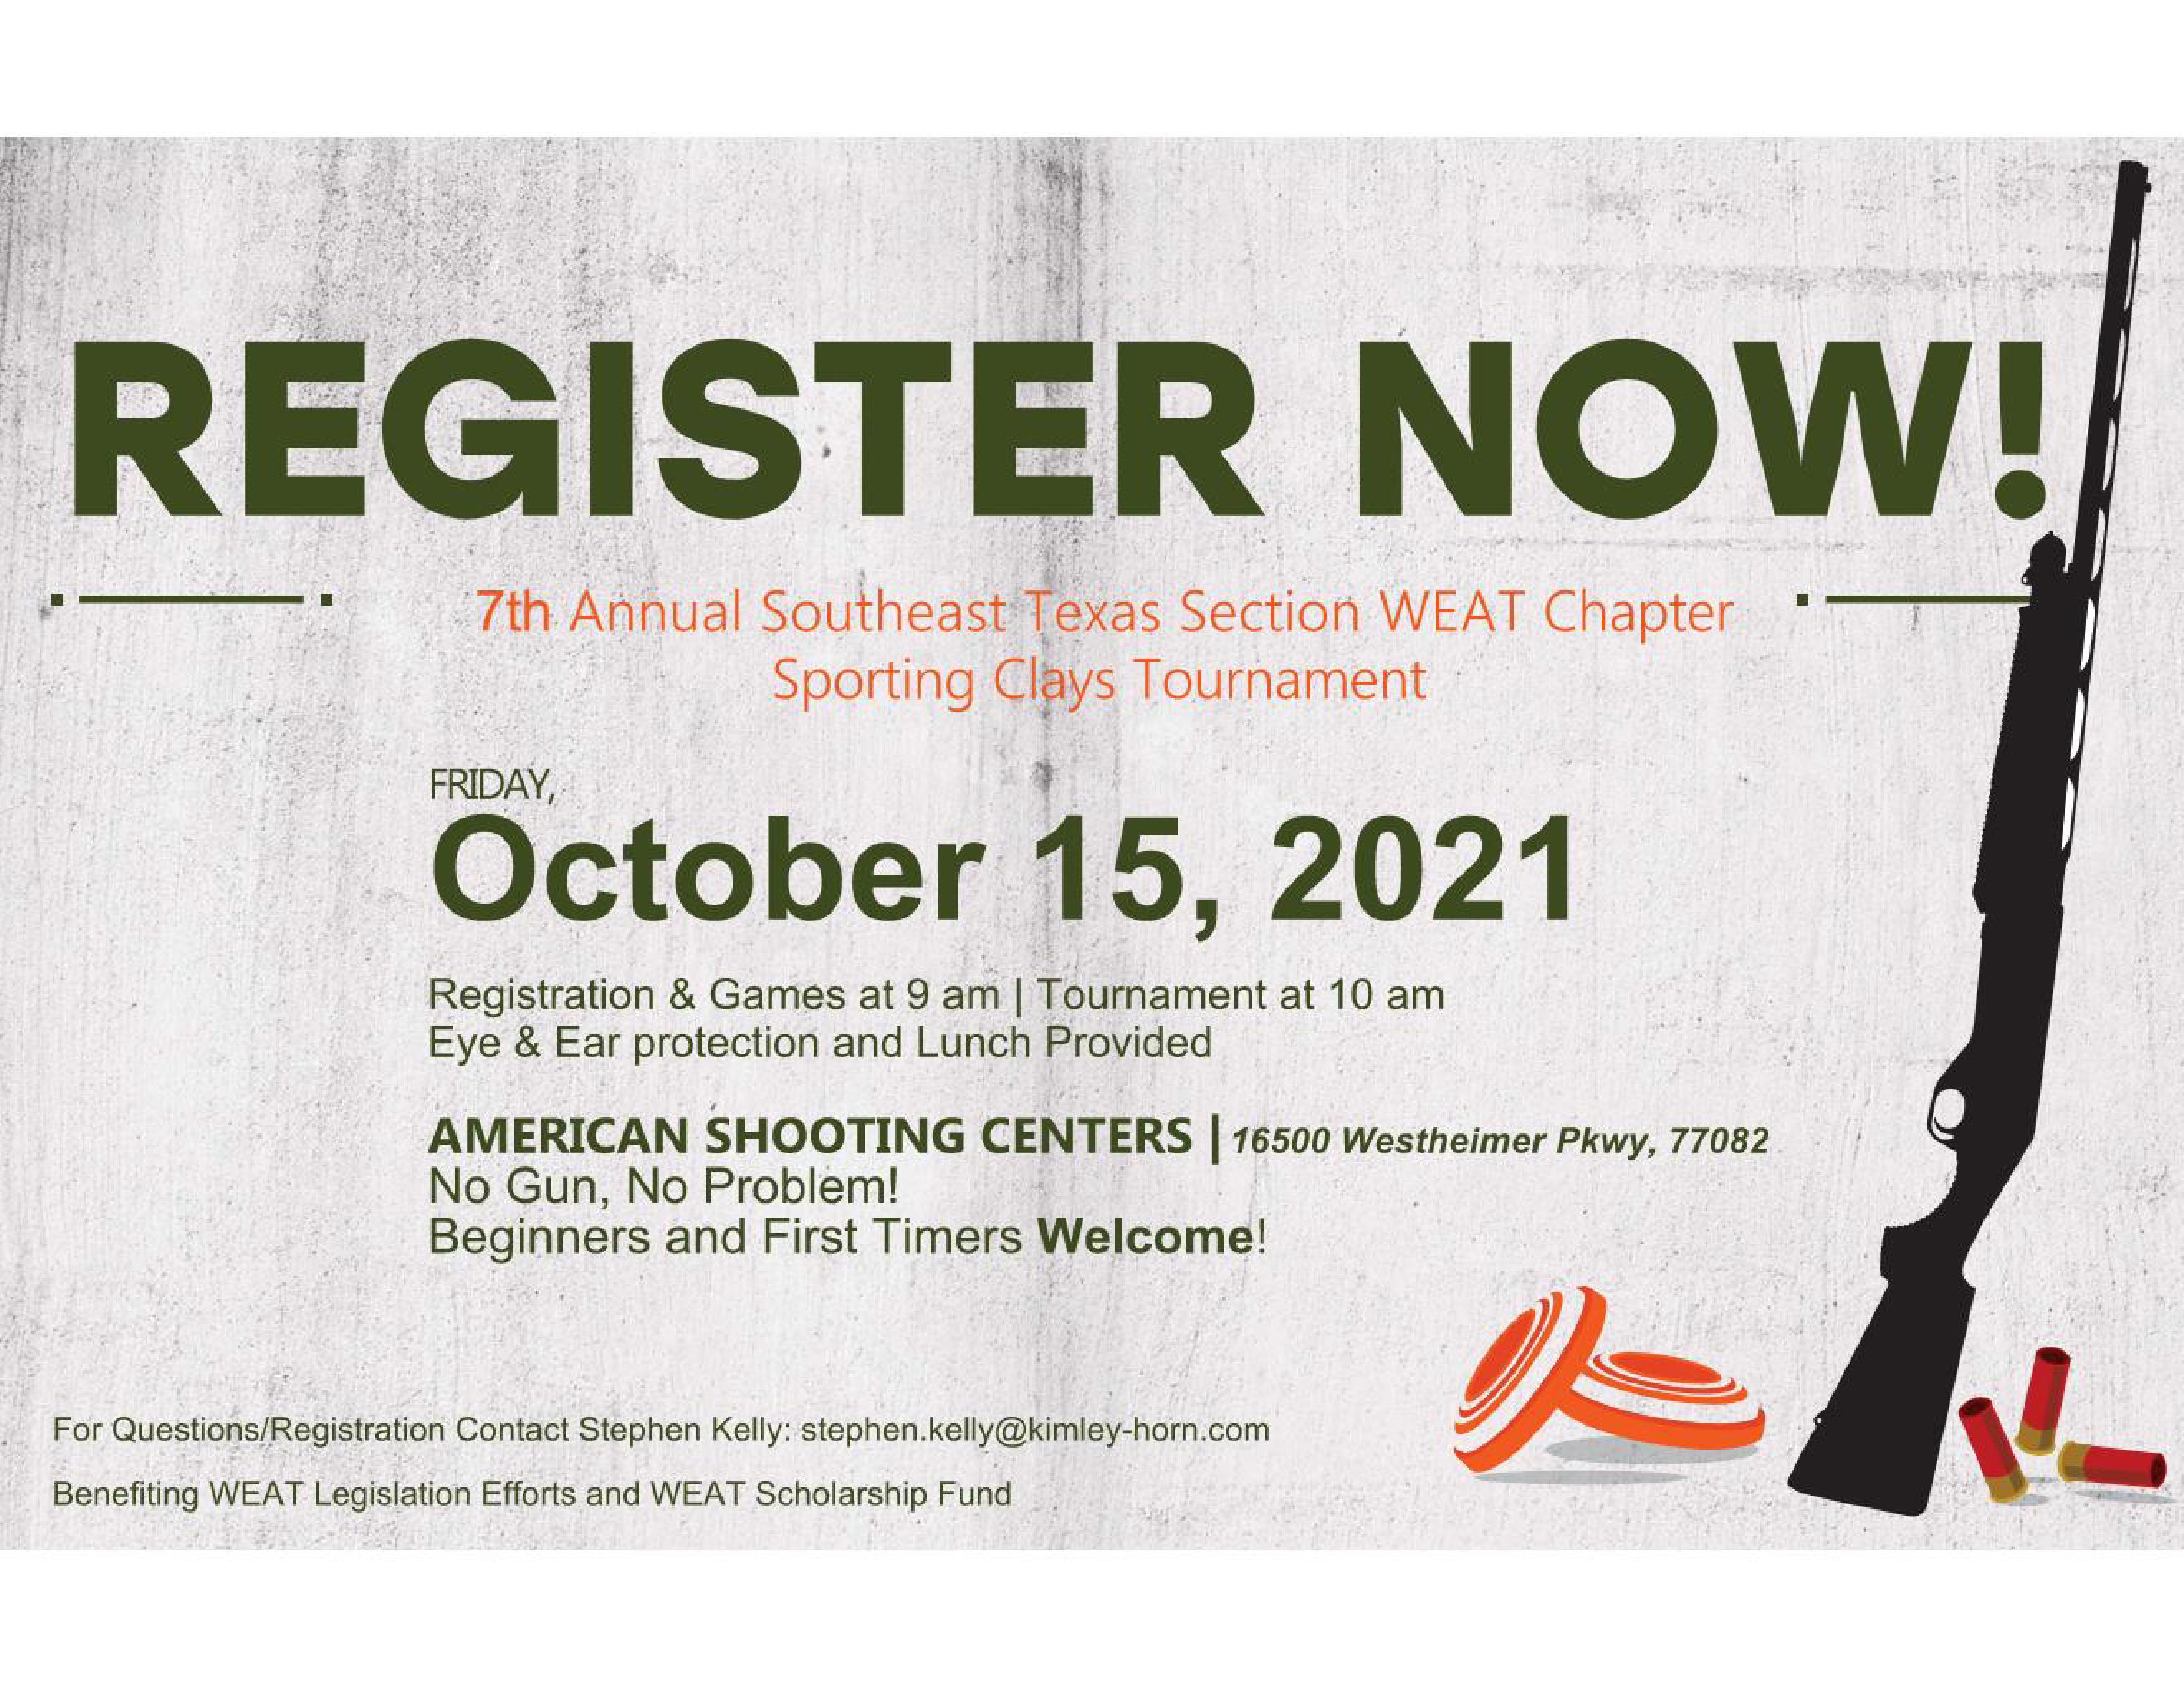 7th Annual Southeast Texas Section WEAT Chapter Sporting Clay Tournament